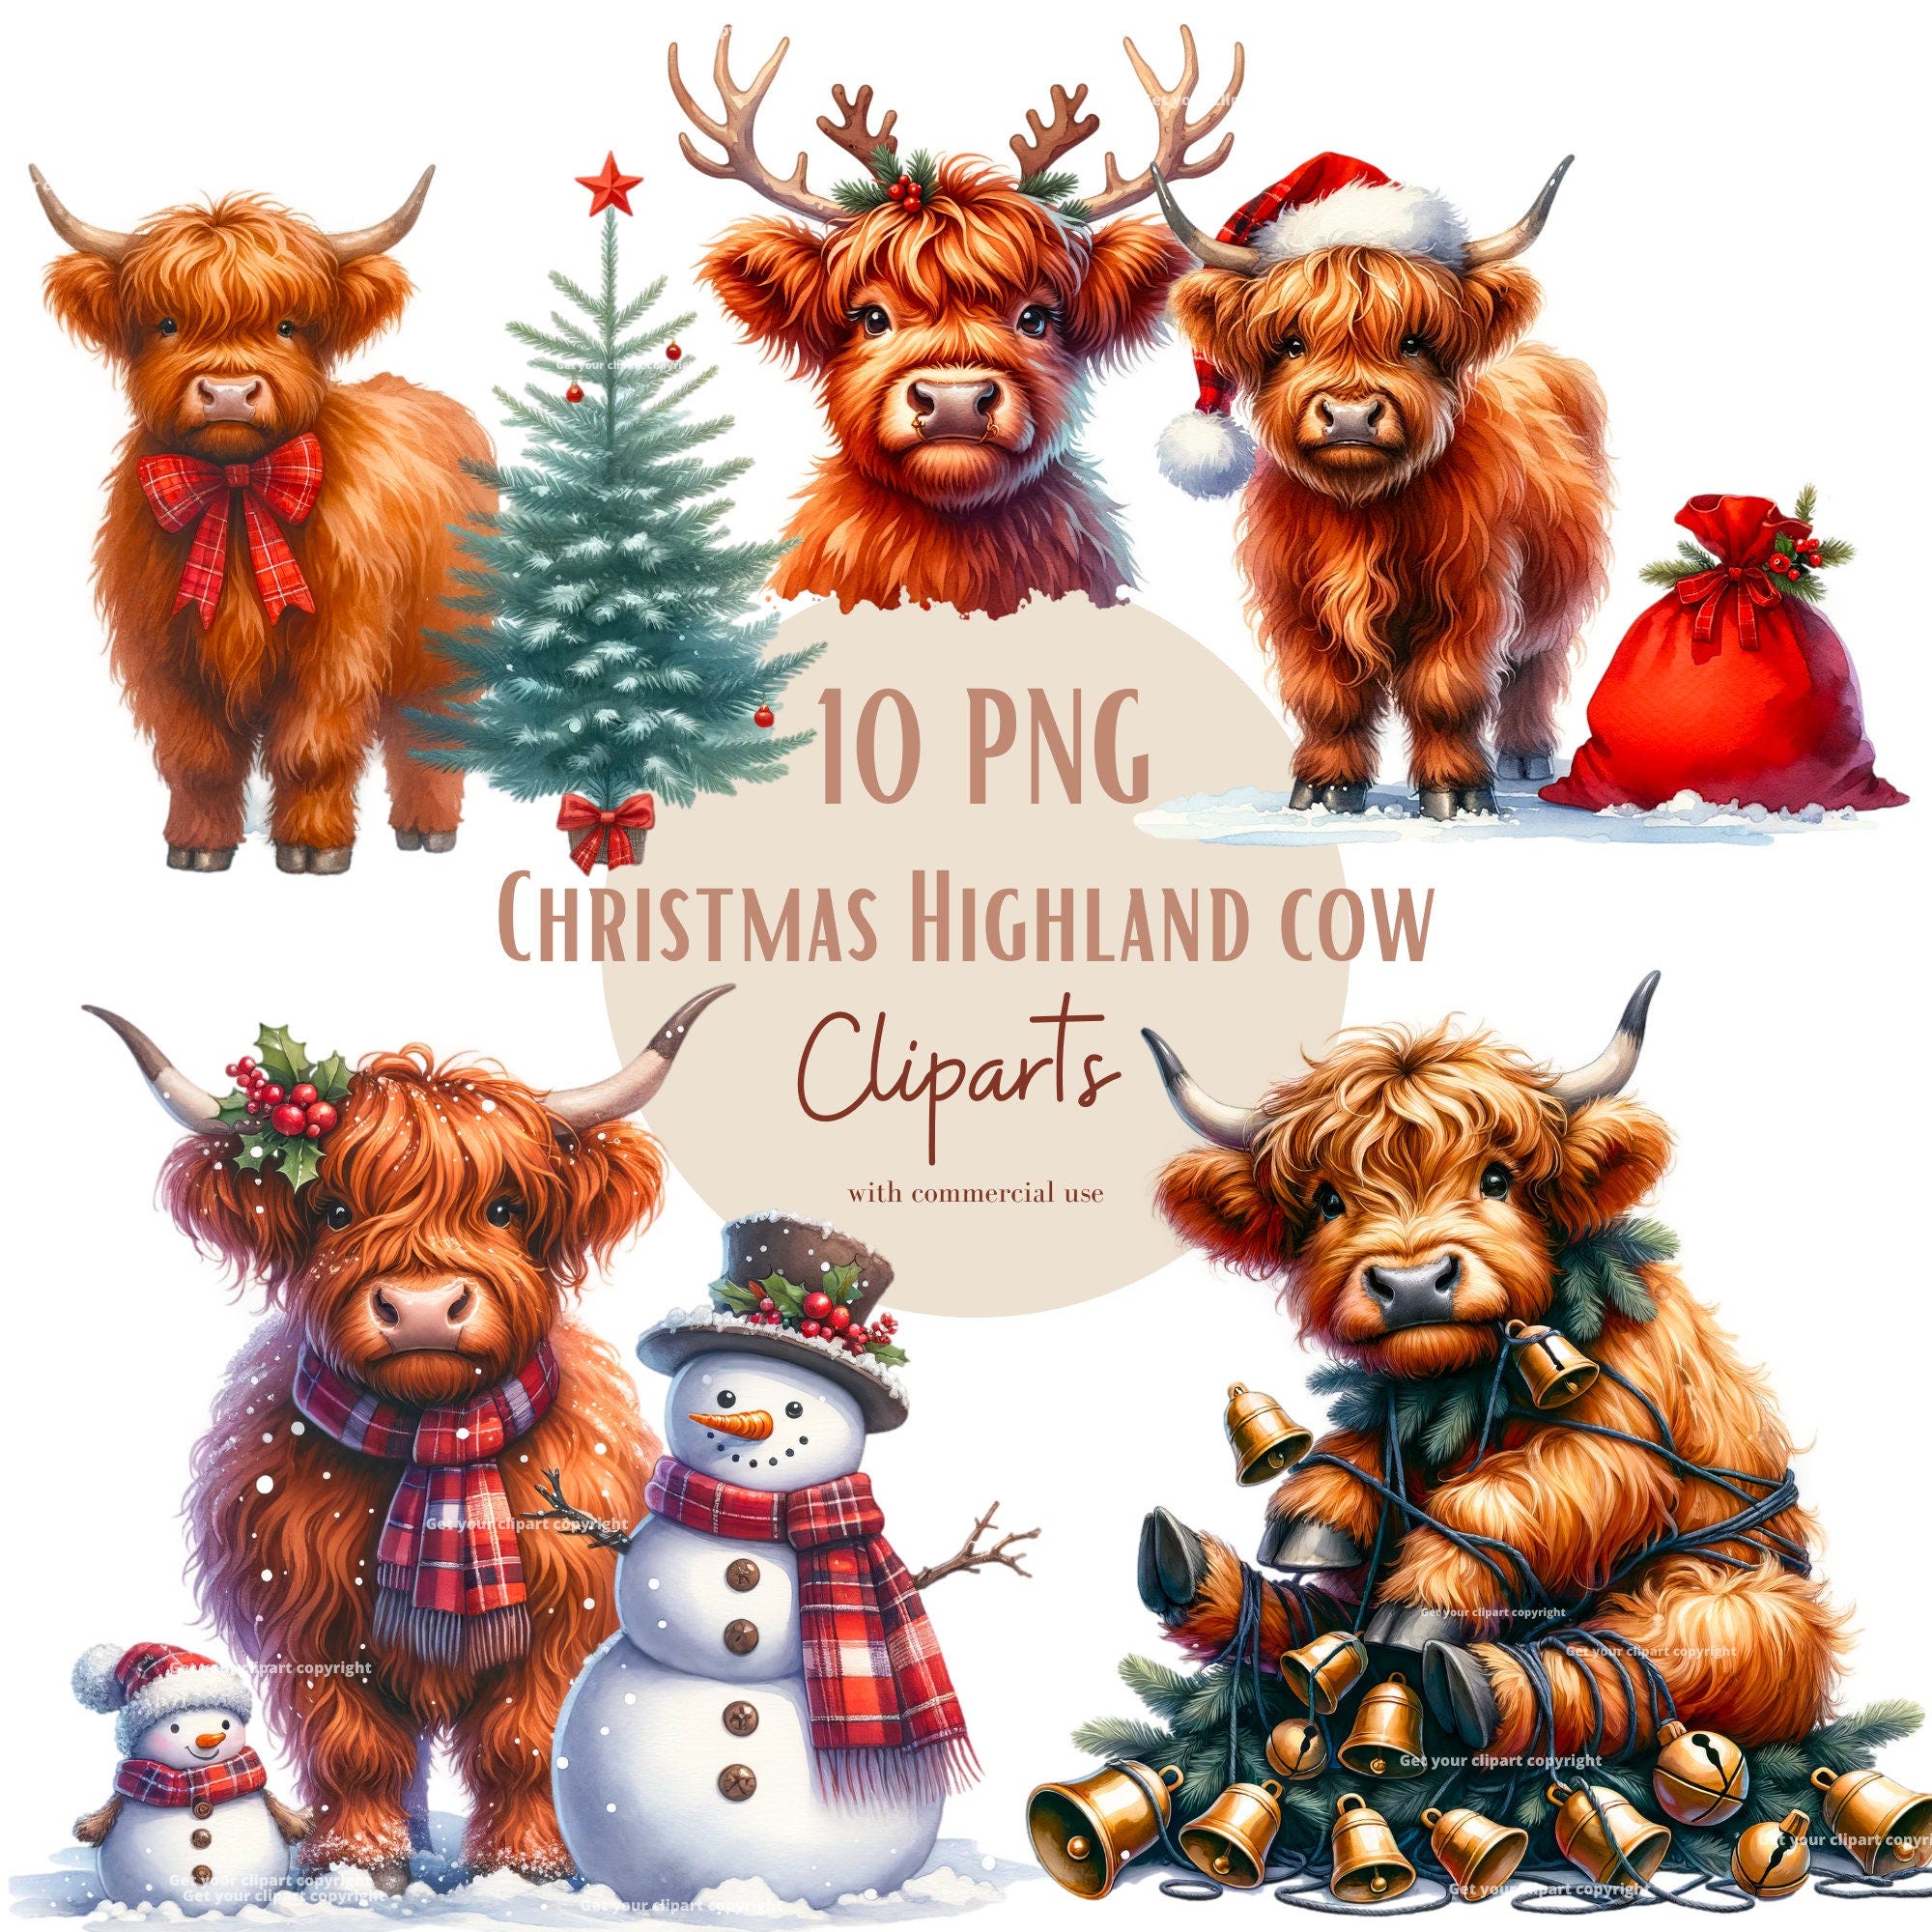 Christmas Highland cow clipart bundle, Scottish Highland cow, Set of 10, Transparent background, Commercial use, Instant download